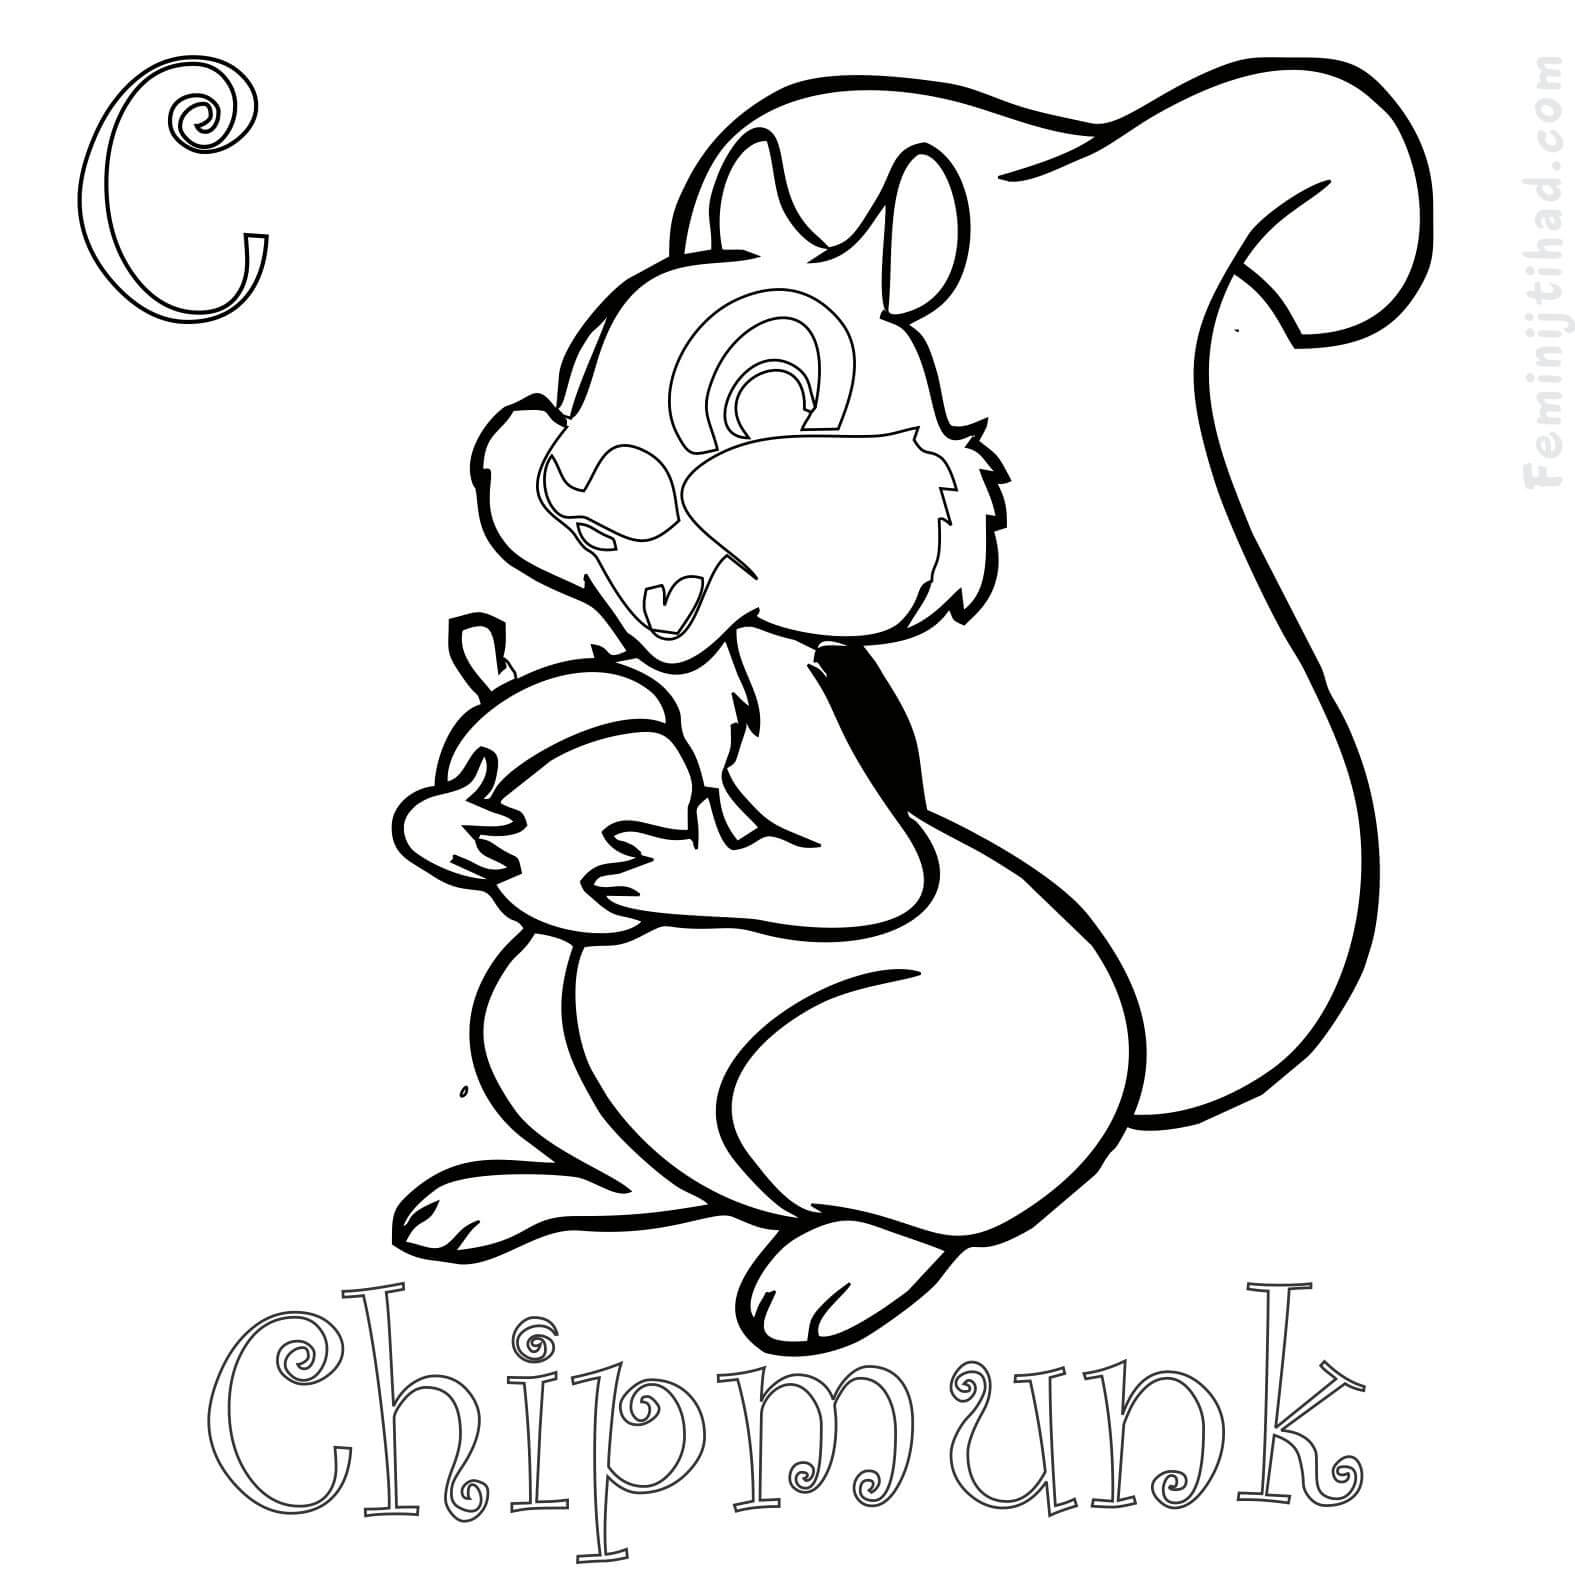 coloring page of a chipmunk